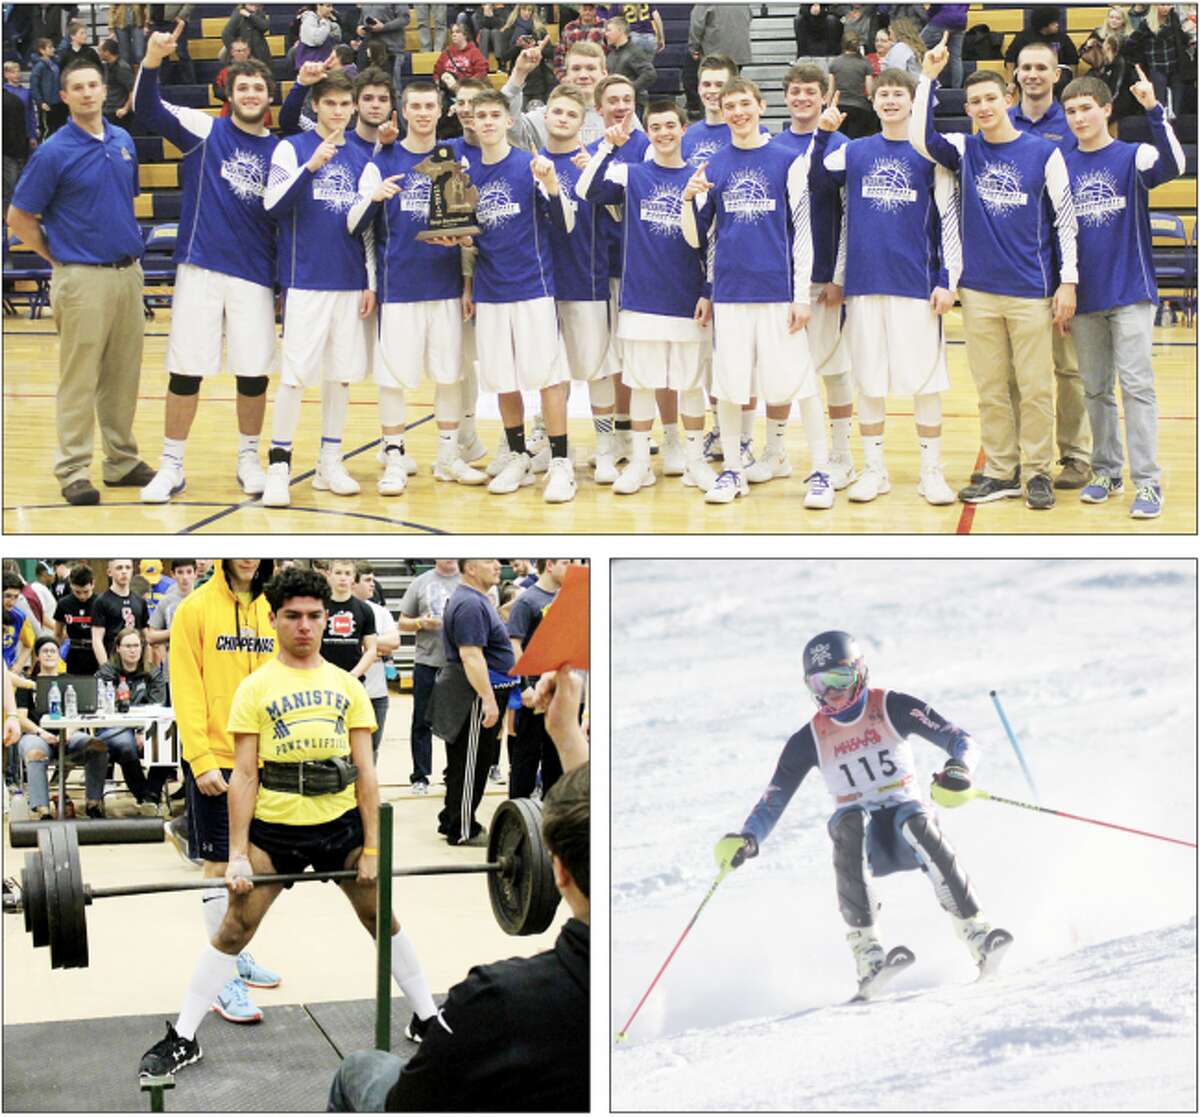 Pictured (clockwise from top): The Onekama boys basketball team celebrates its first district title since 2003 on March 9, 2018; Onekama skier Keagan Thomas earned All-State honors at the Division 2 state finals in February; Manistee’s Jesus Reyna-Cruz participates in the deadlift at the Michigan High School Power Lifting Association state finals in March of last year. (News Advocate file photos)